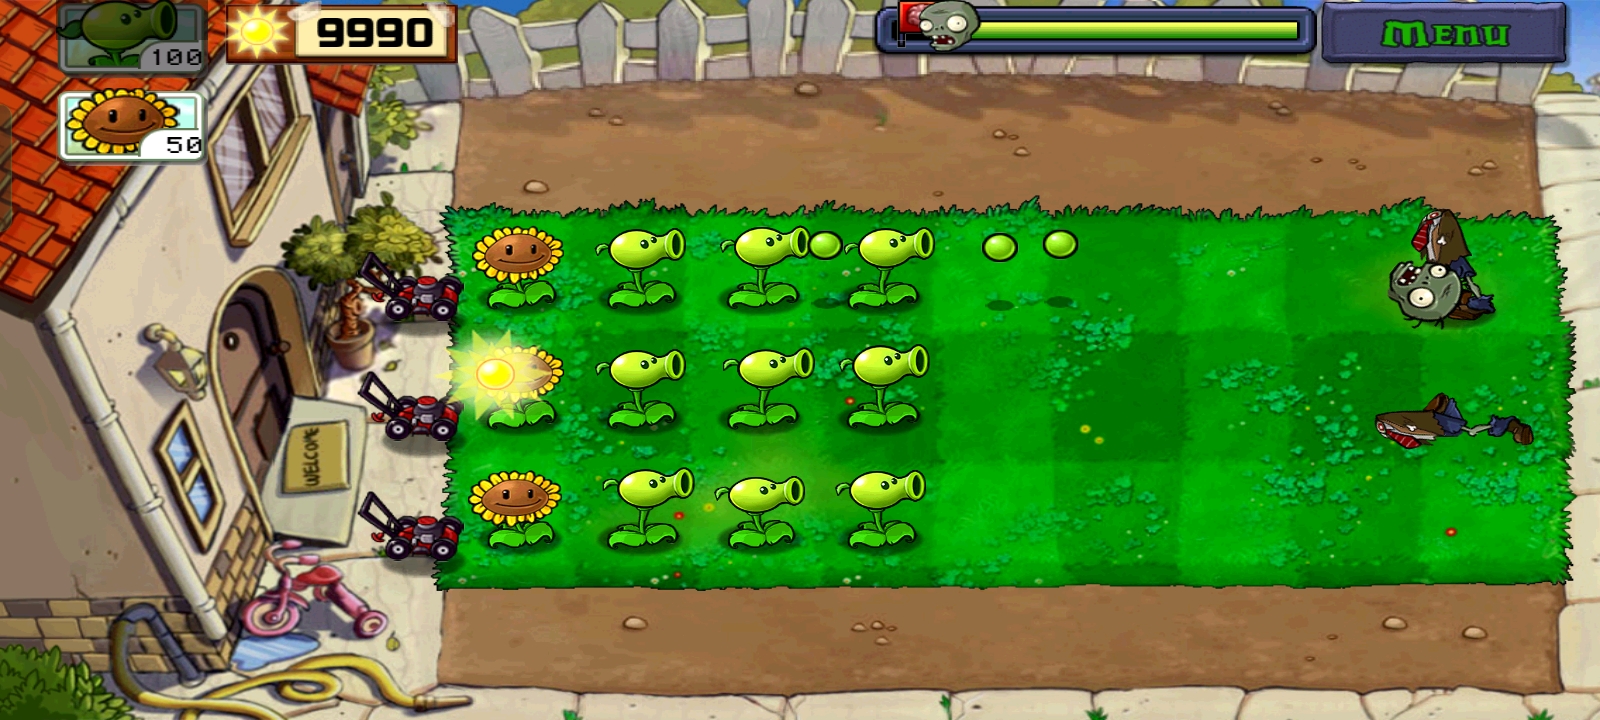 Download Plants Vs Zombies 2 MOD APK v11.0.1 (Unlimited Money) For Android